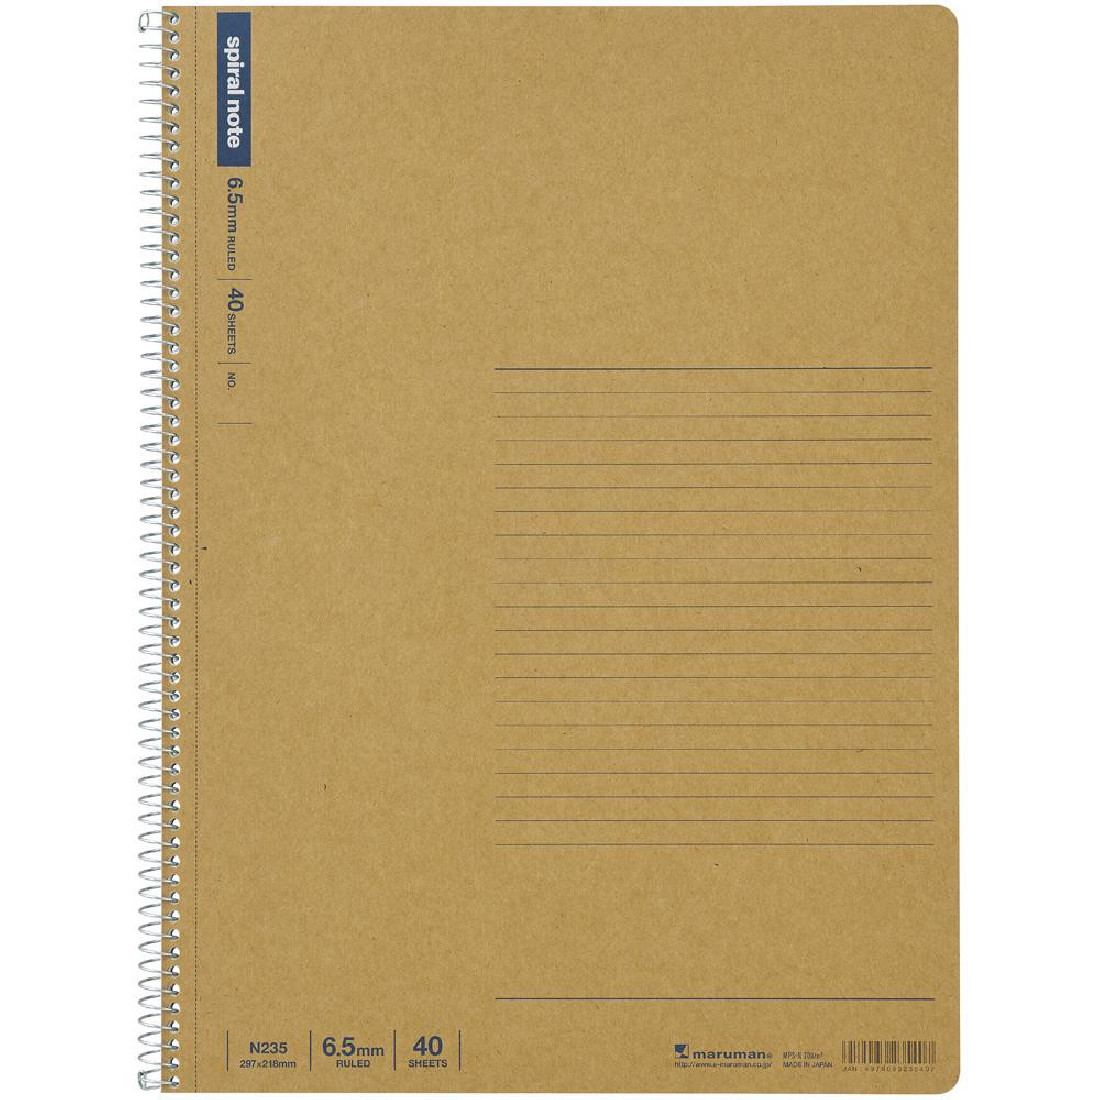 Maruman A4 spiral notebook lined paper 40 sheets N235